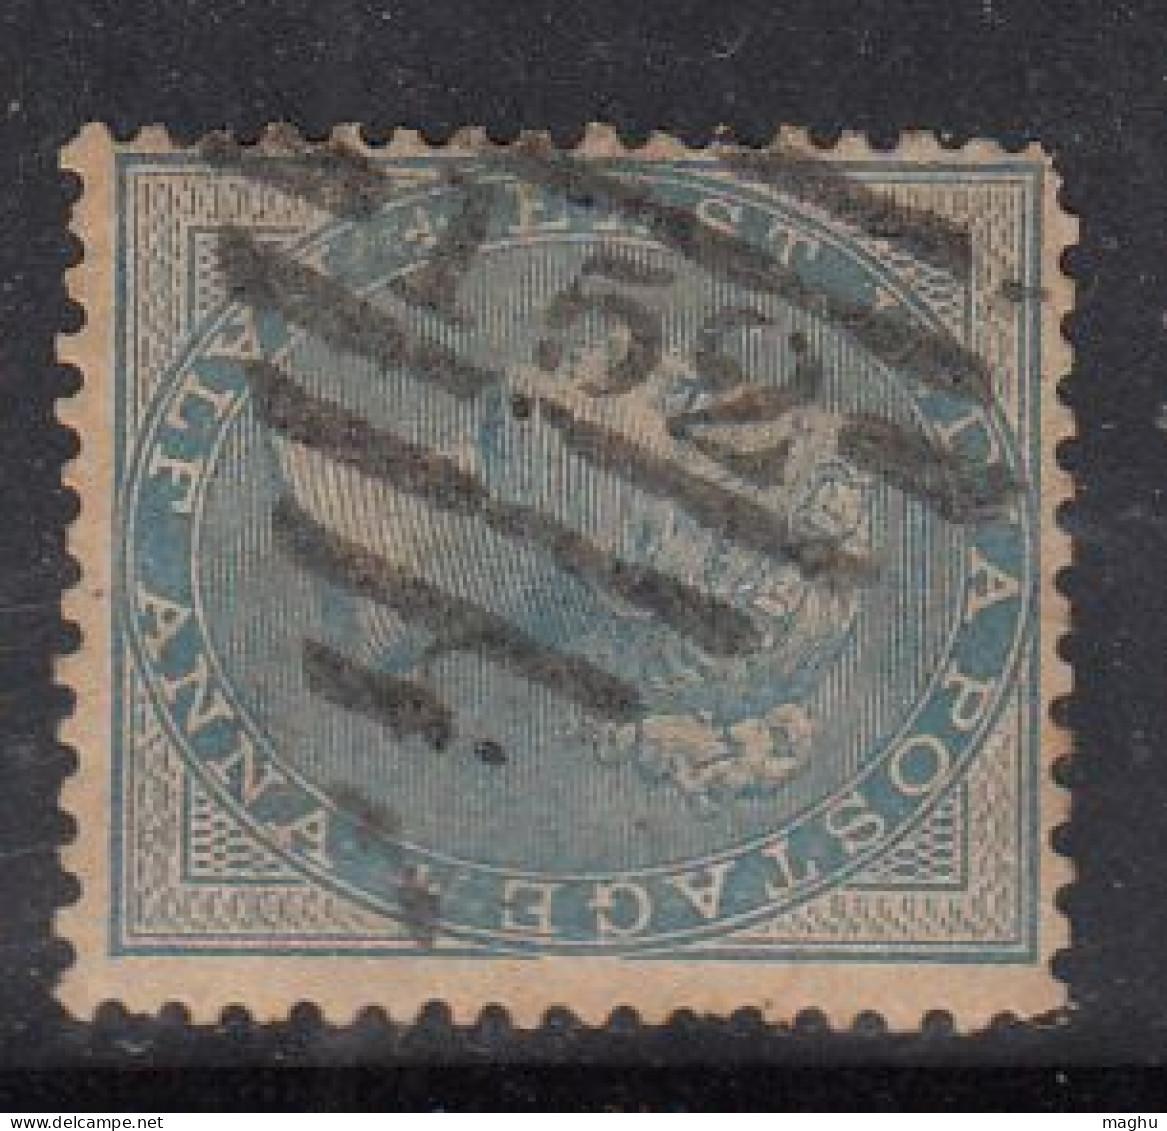 152 Tranquebar Madras Circle Cooper Renouf 12a British East India Used Early Indian Cancellations Danish Denmark Norway - 1854 East India Company Administration